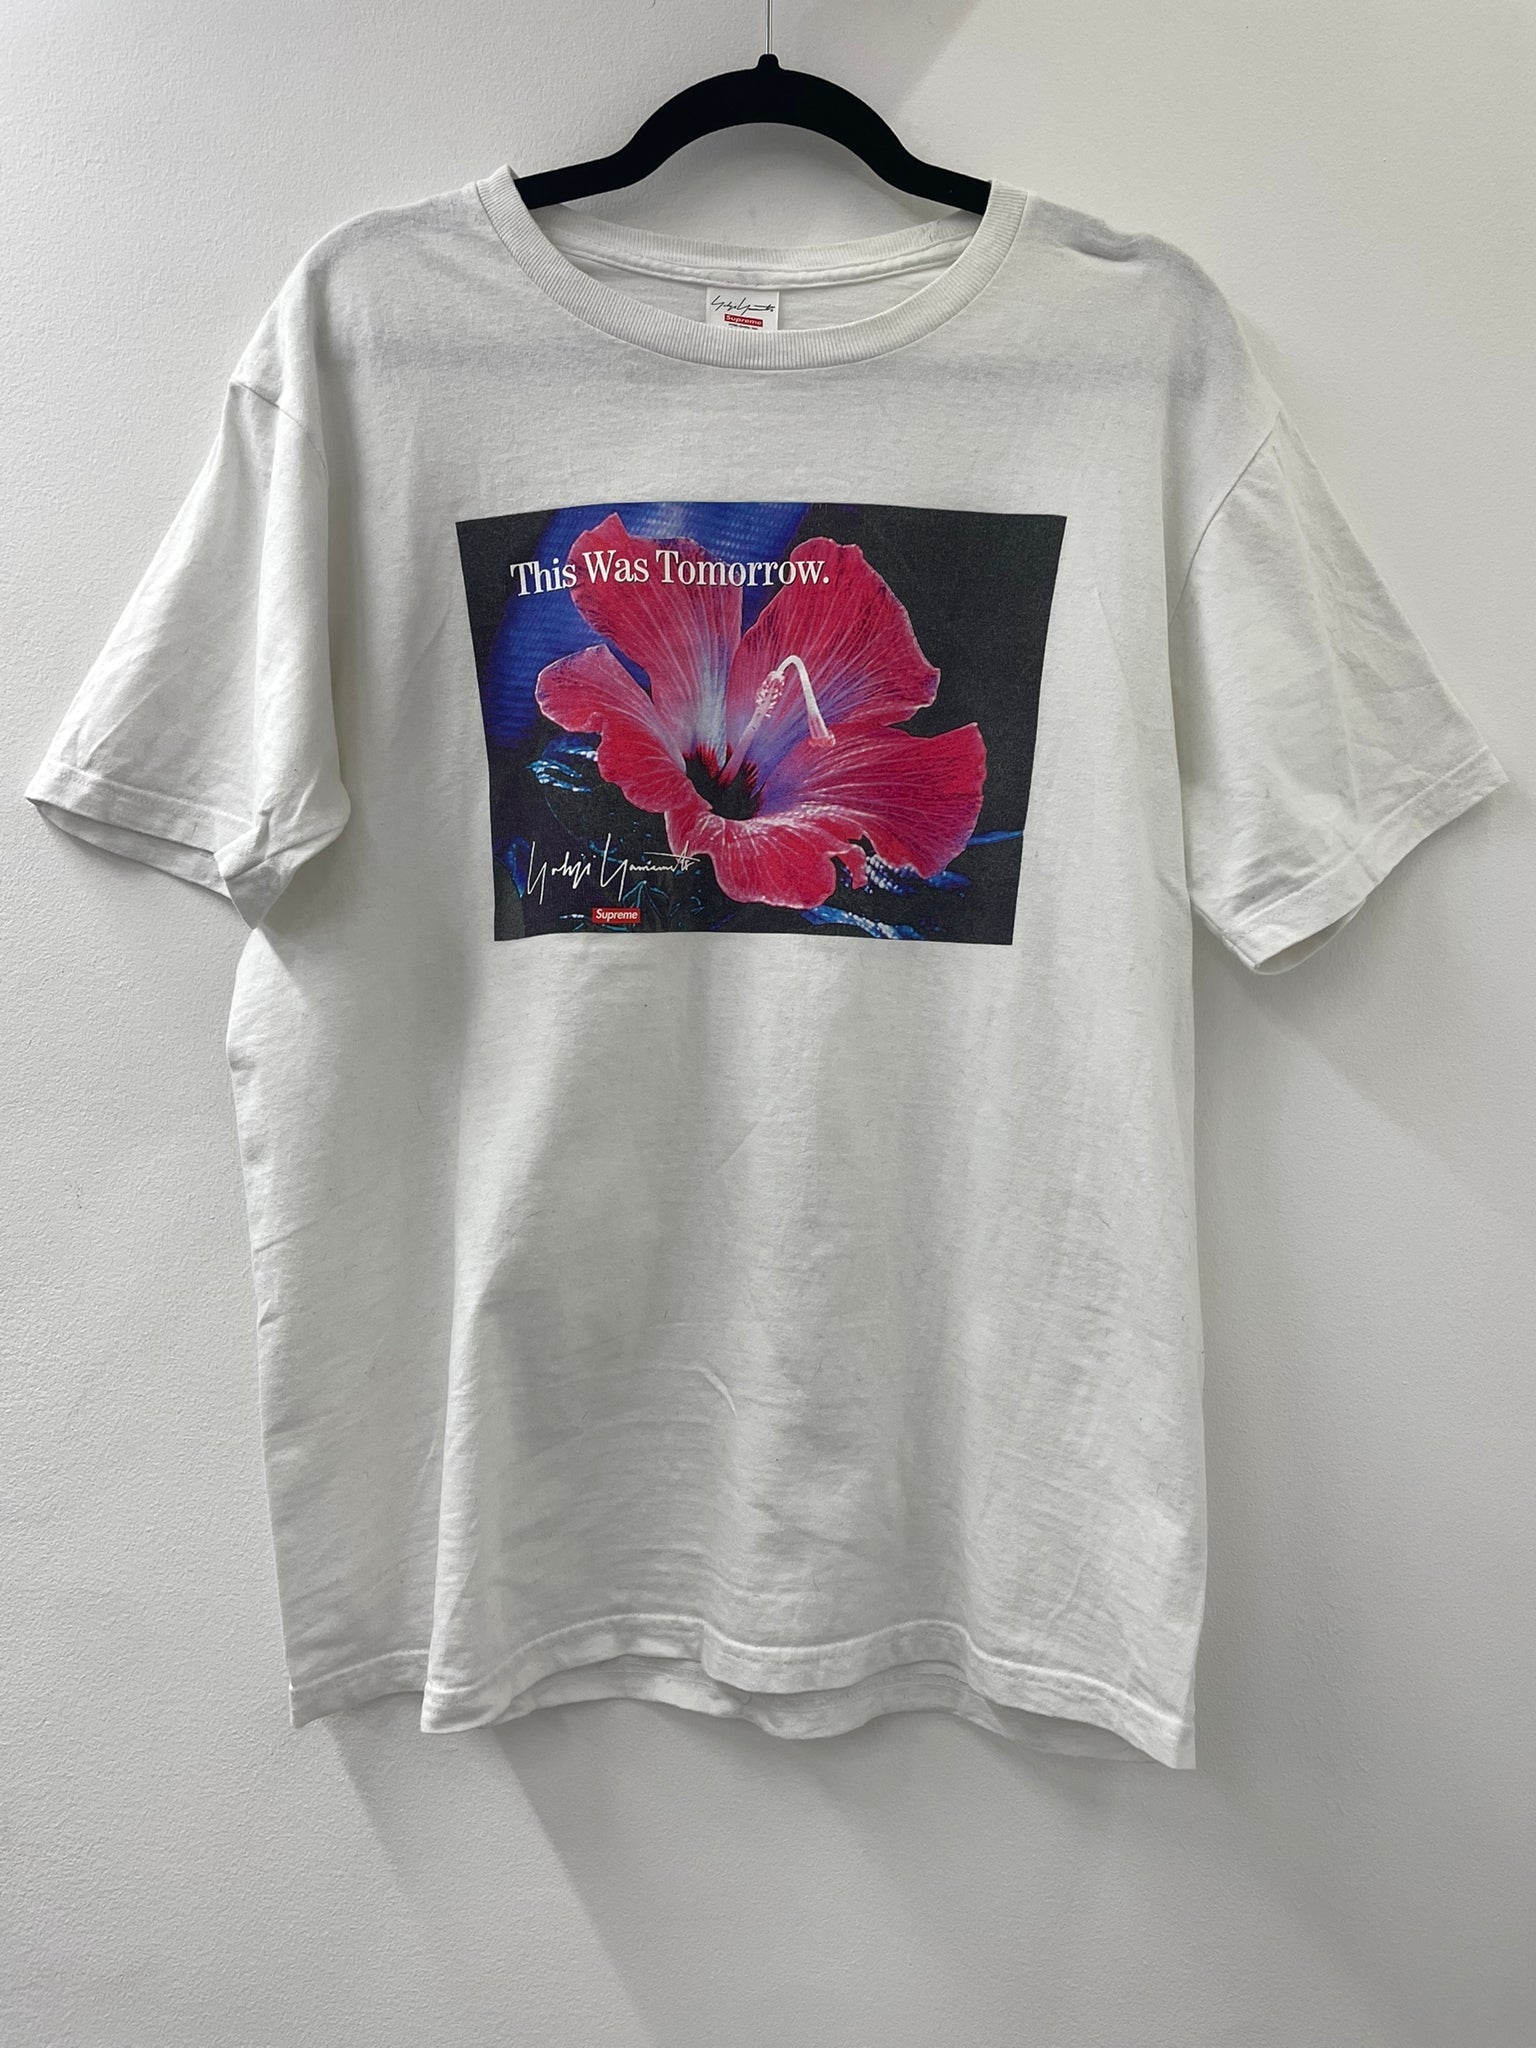 PRE LOVED - THIS T - SUPREME WHITE TIE-DYE COLLAB) - SWEATER TOMORROW (YOJHI SHIRT MONCLER WAS